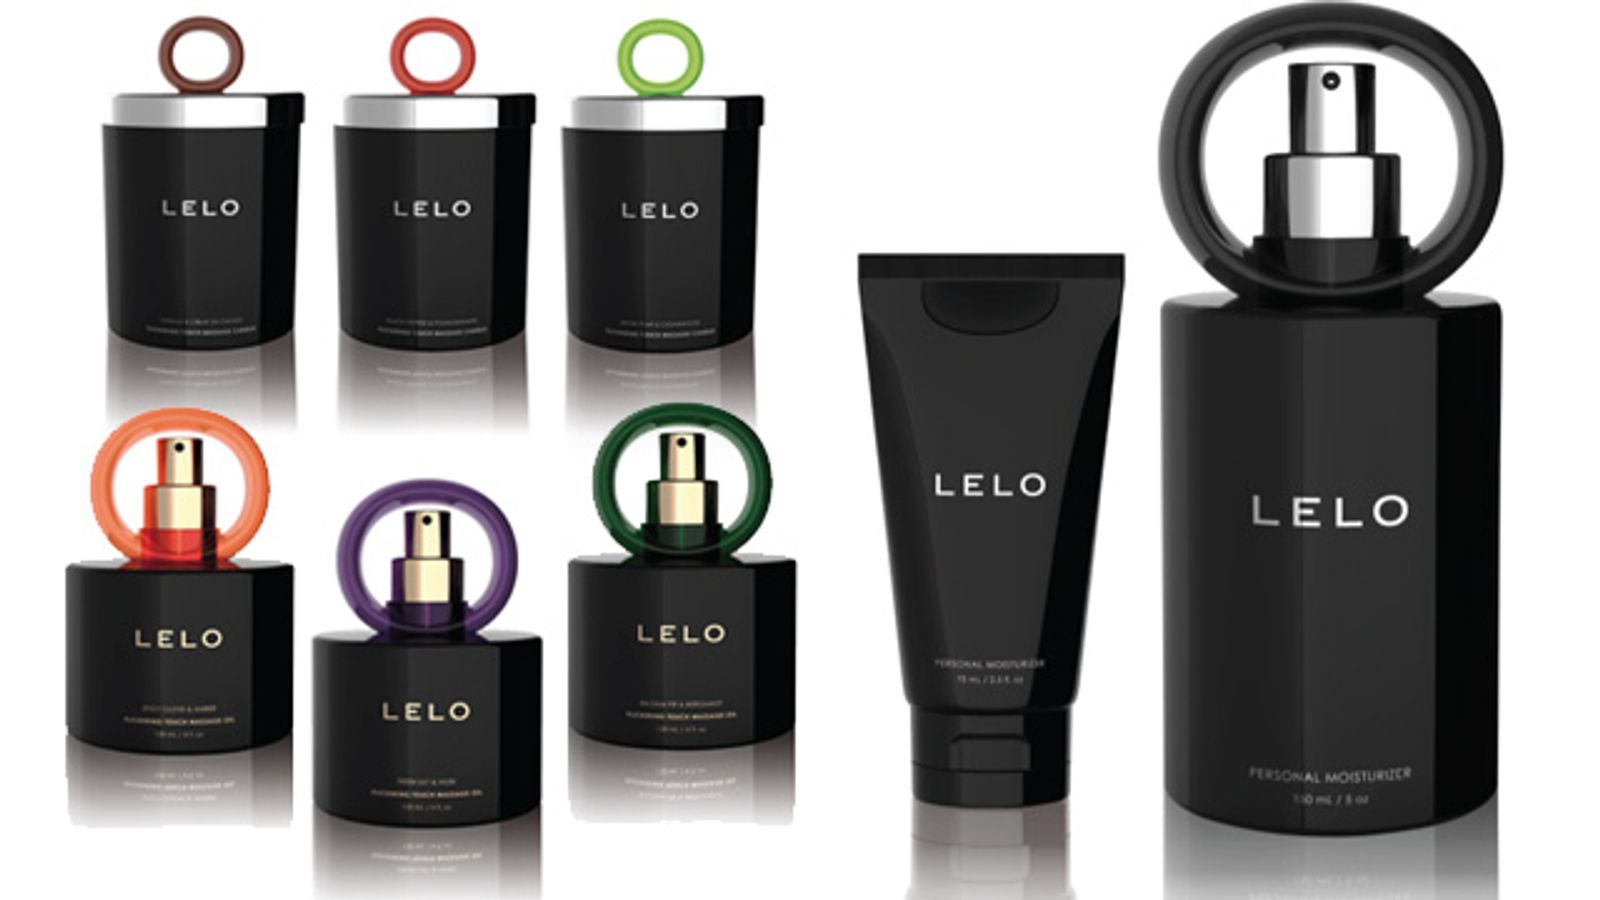 Ignite Your Senses With LELO’s Flickering Touch Line